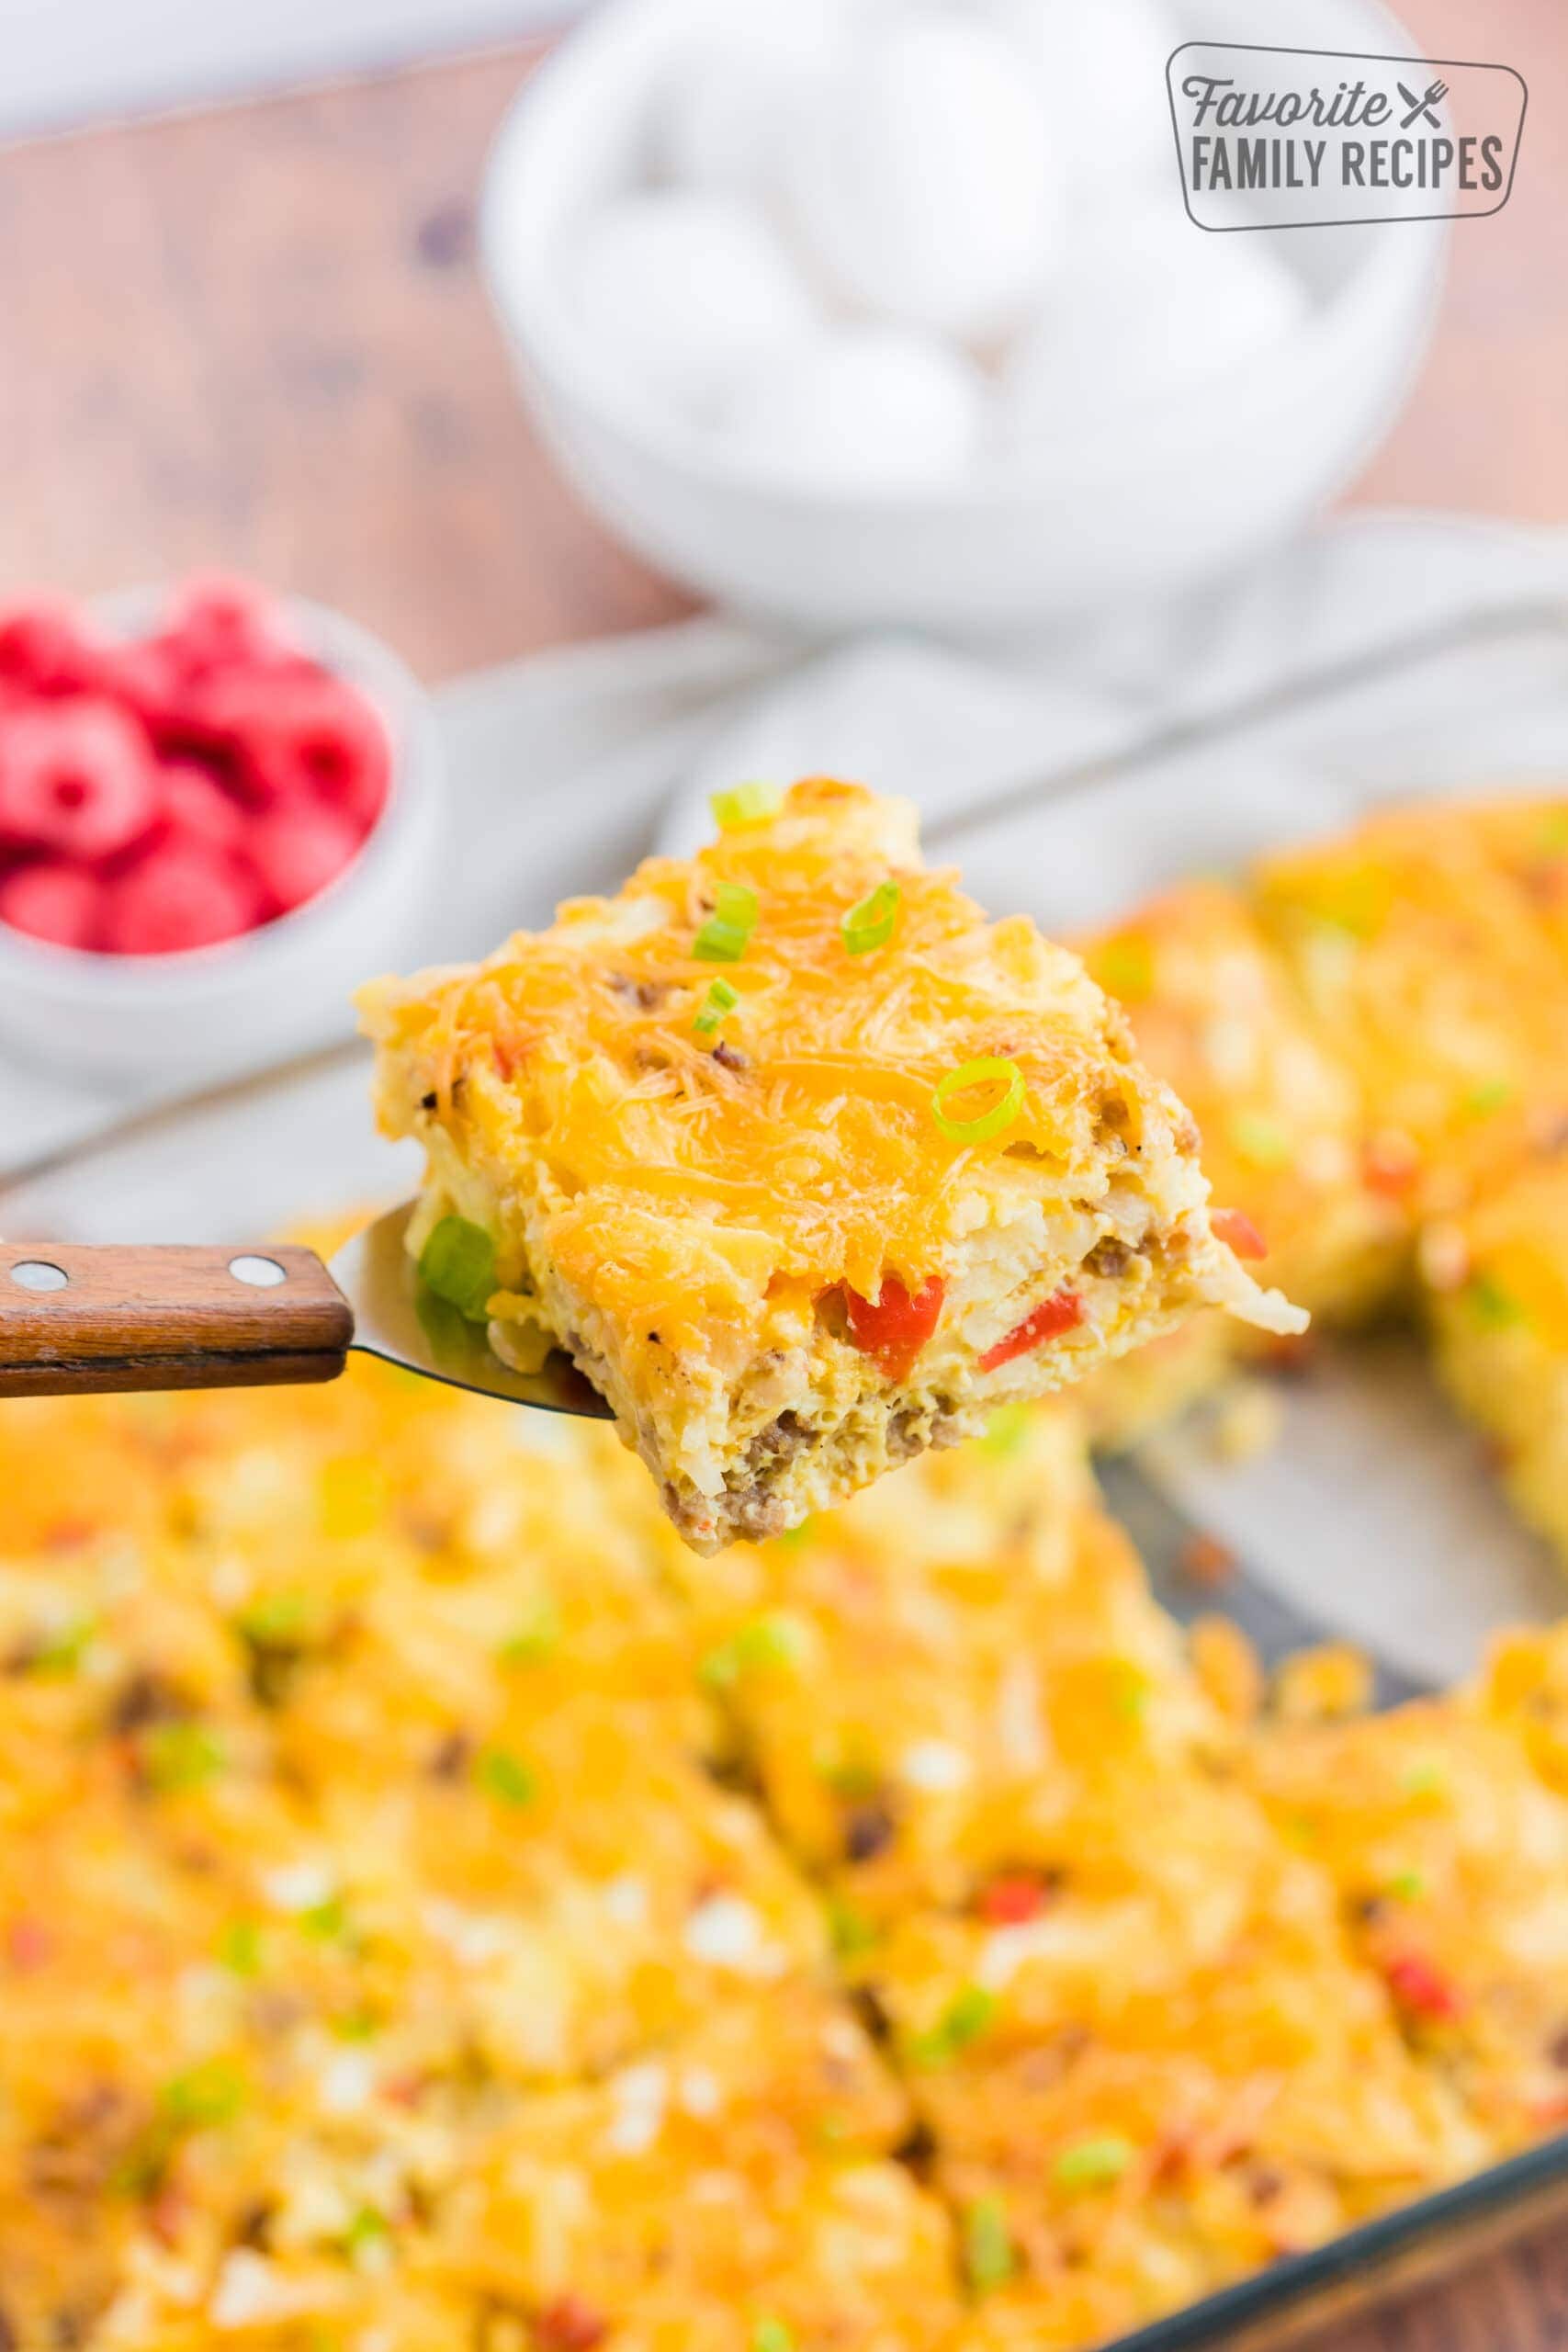 A slice of breakfast casserole being lifted out of a pan showing the eggs, sausage, peppers, and cheese.